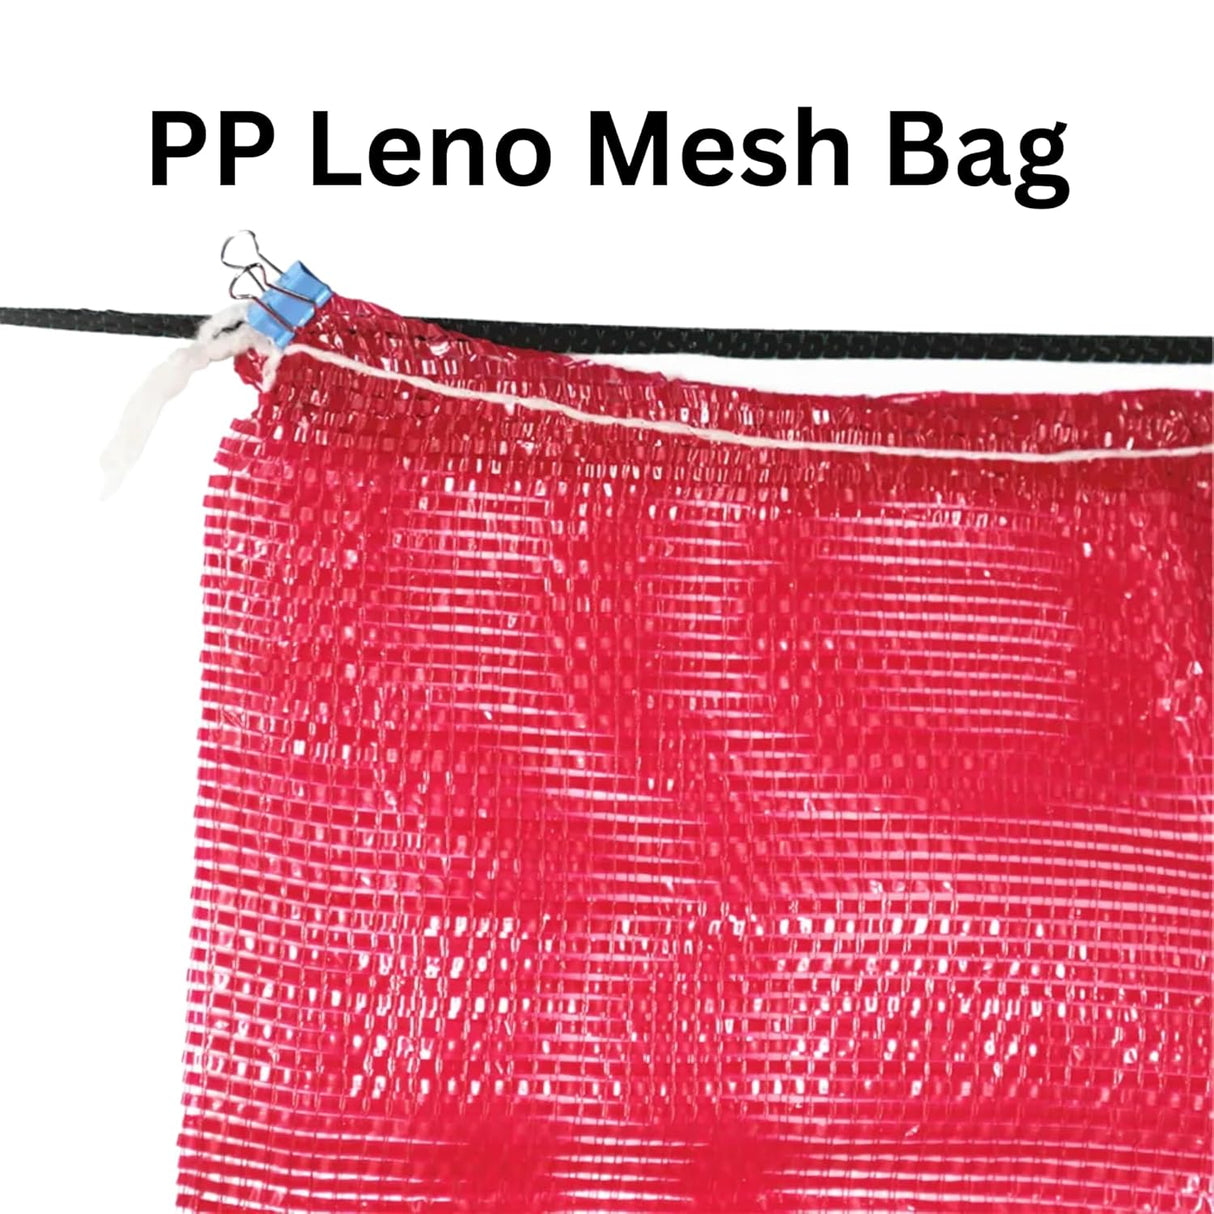 SINGHAL Leno Mesh Storage Produce Bags Reusable for Vegetable Storage Bags Onion Storage Washable Net Bags (22x38 Inch - Green, 25)